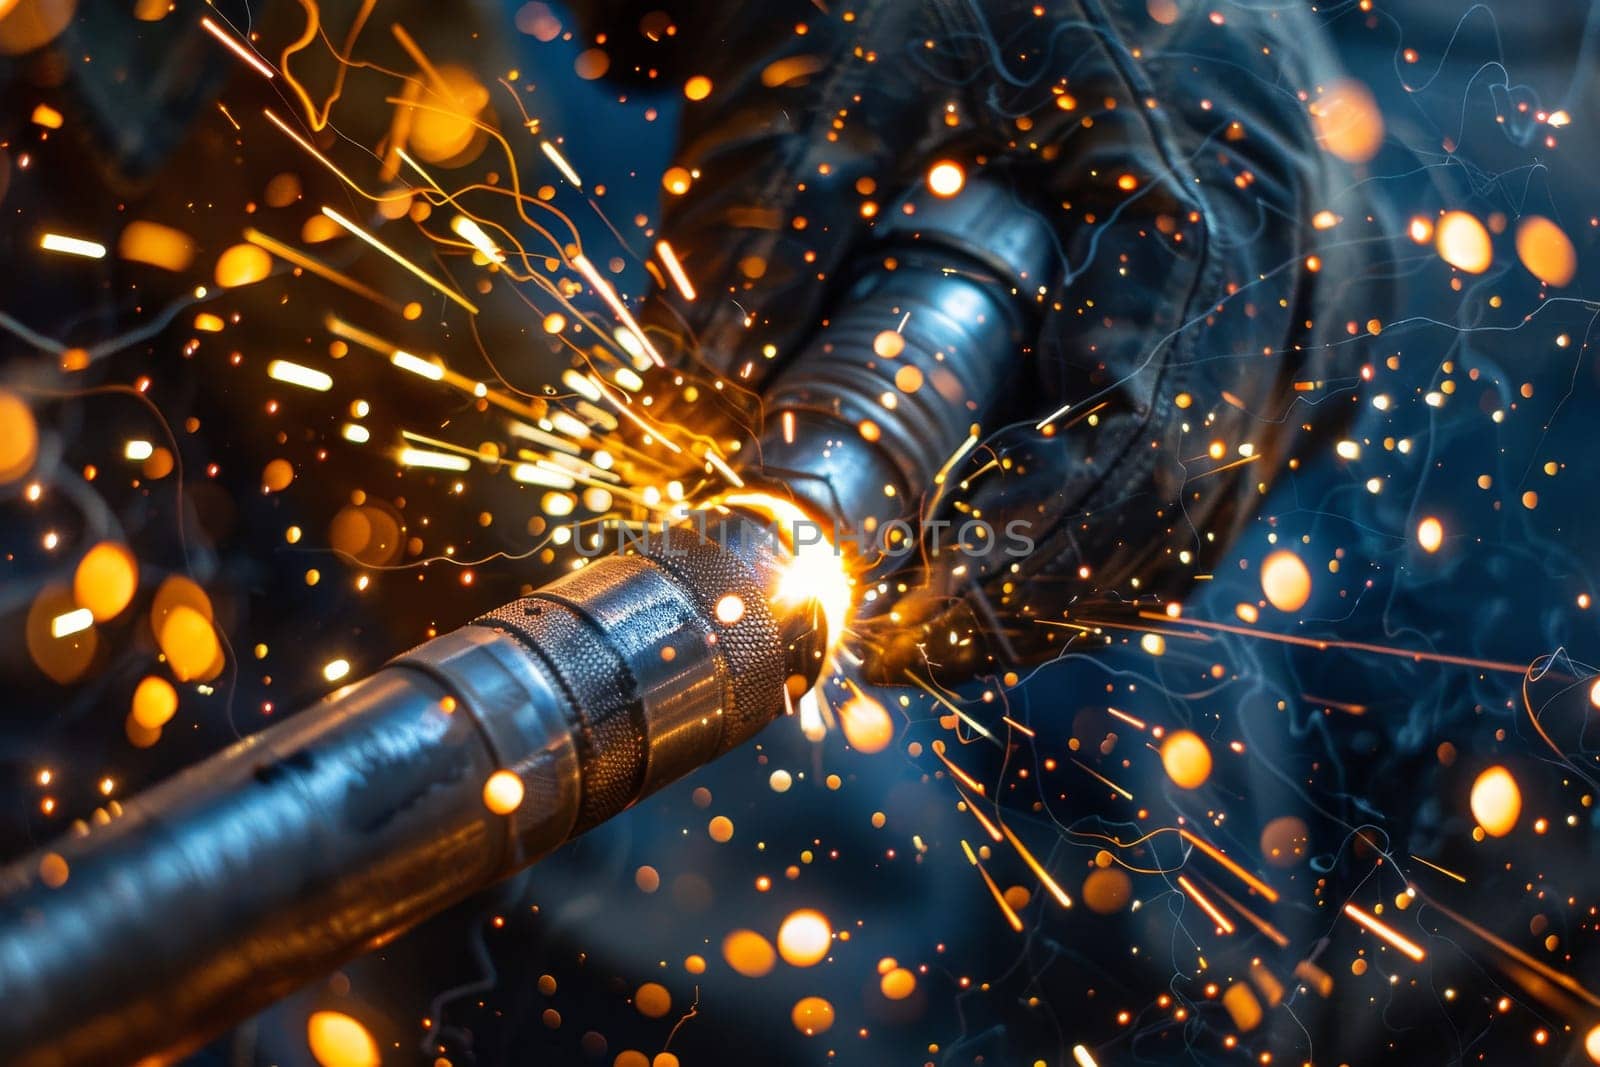 A piece of machinery is being welded, with sparks flying out of it by itchaznong